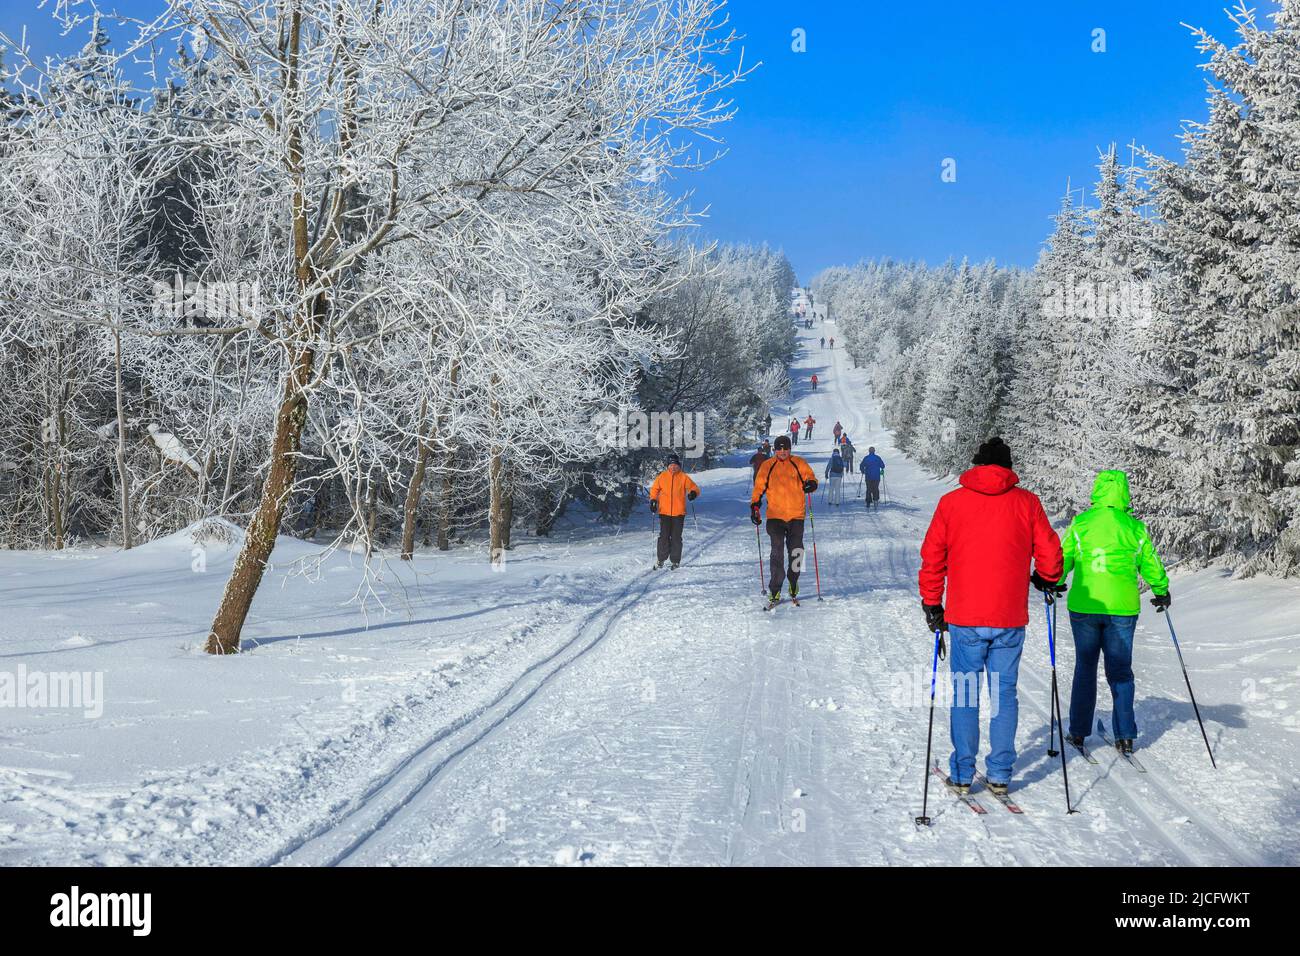 At the weekend, the beautiful weather also attracted the Easter Ore Mountains winter sports center in Altenberg / Zinnwald. Stock Photo